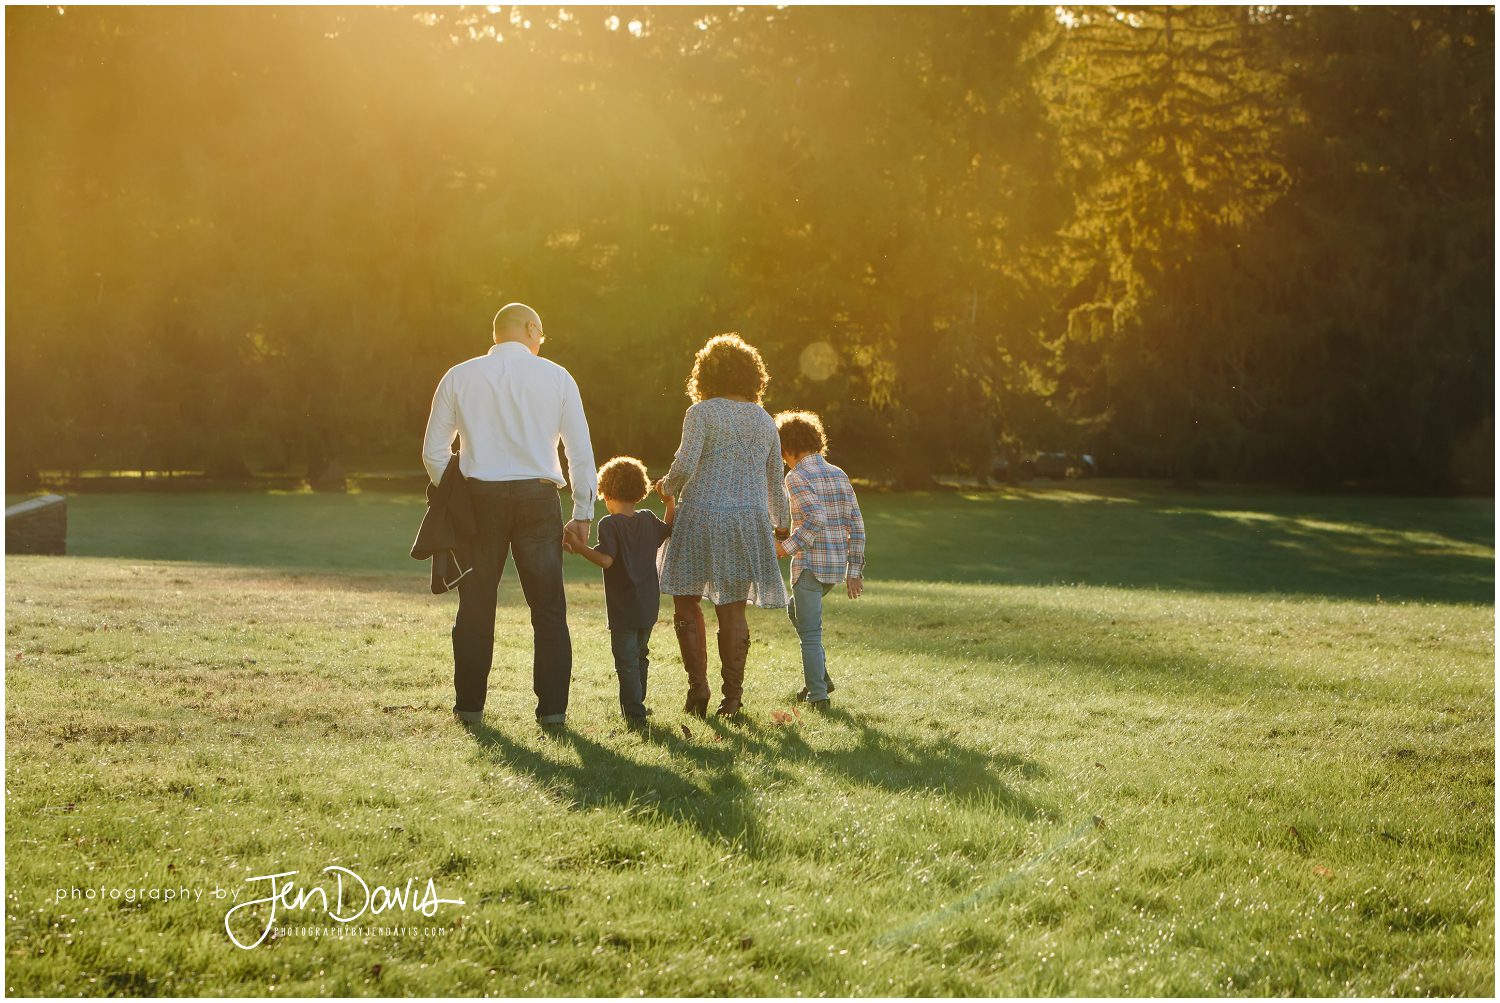 family of 4 walking into the sunset in a park